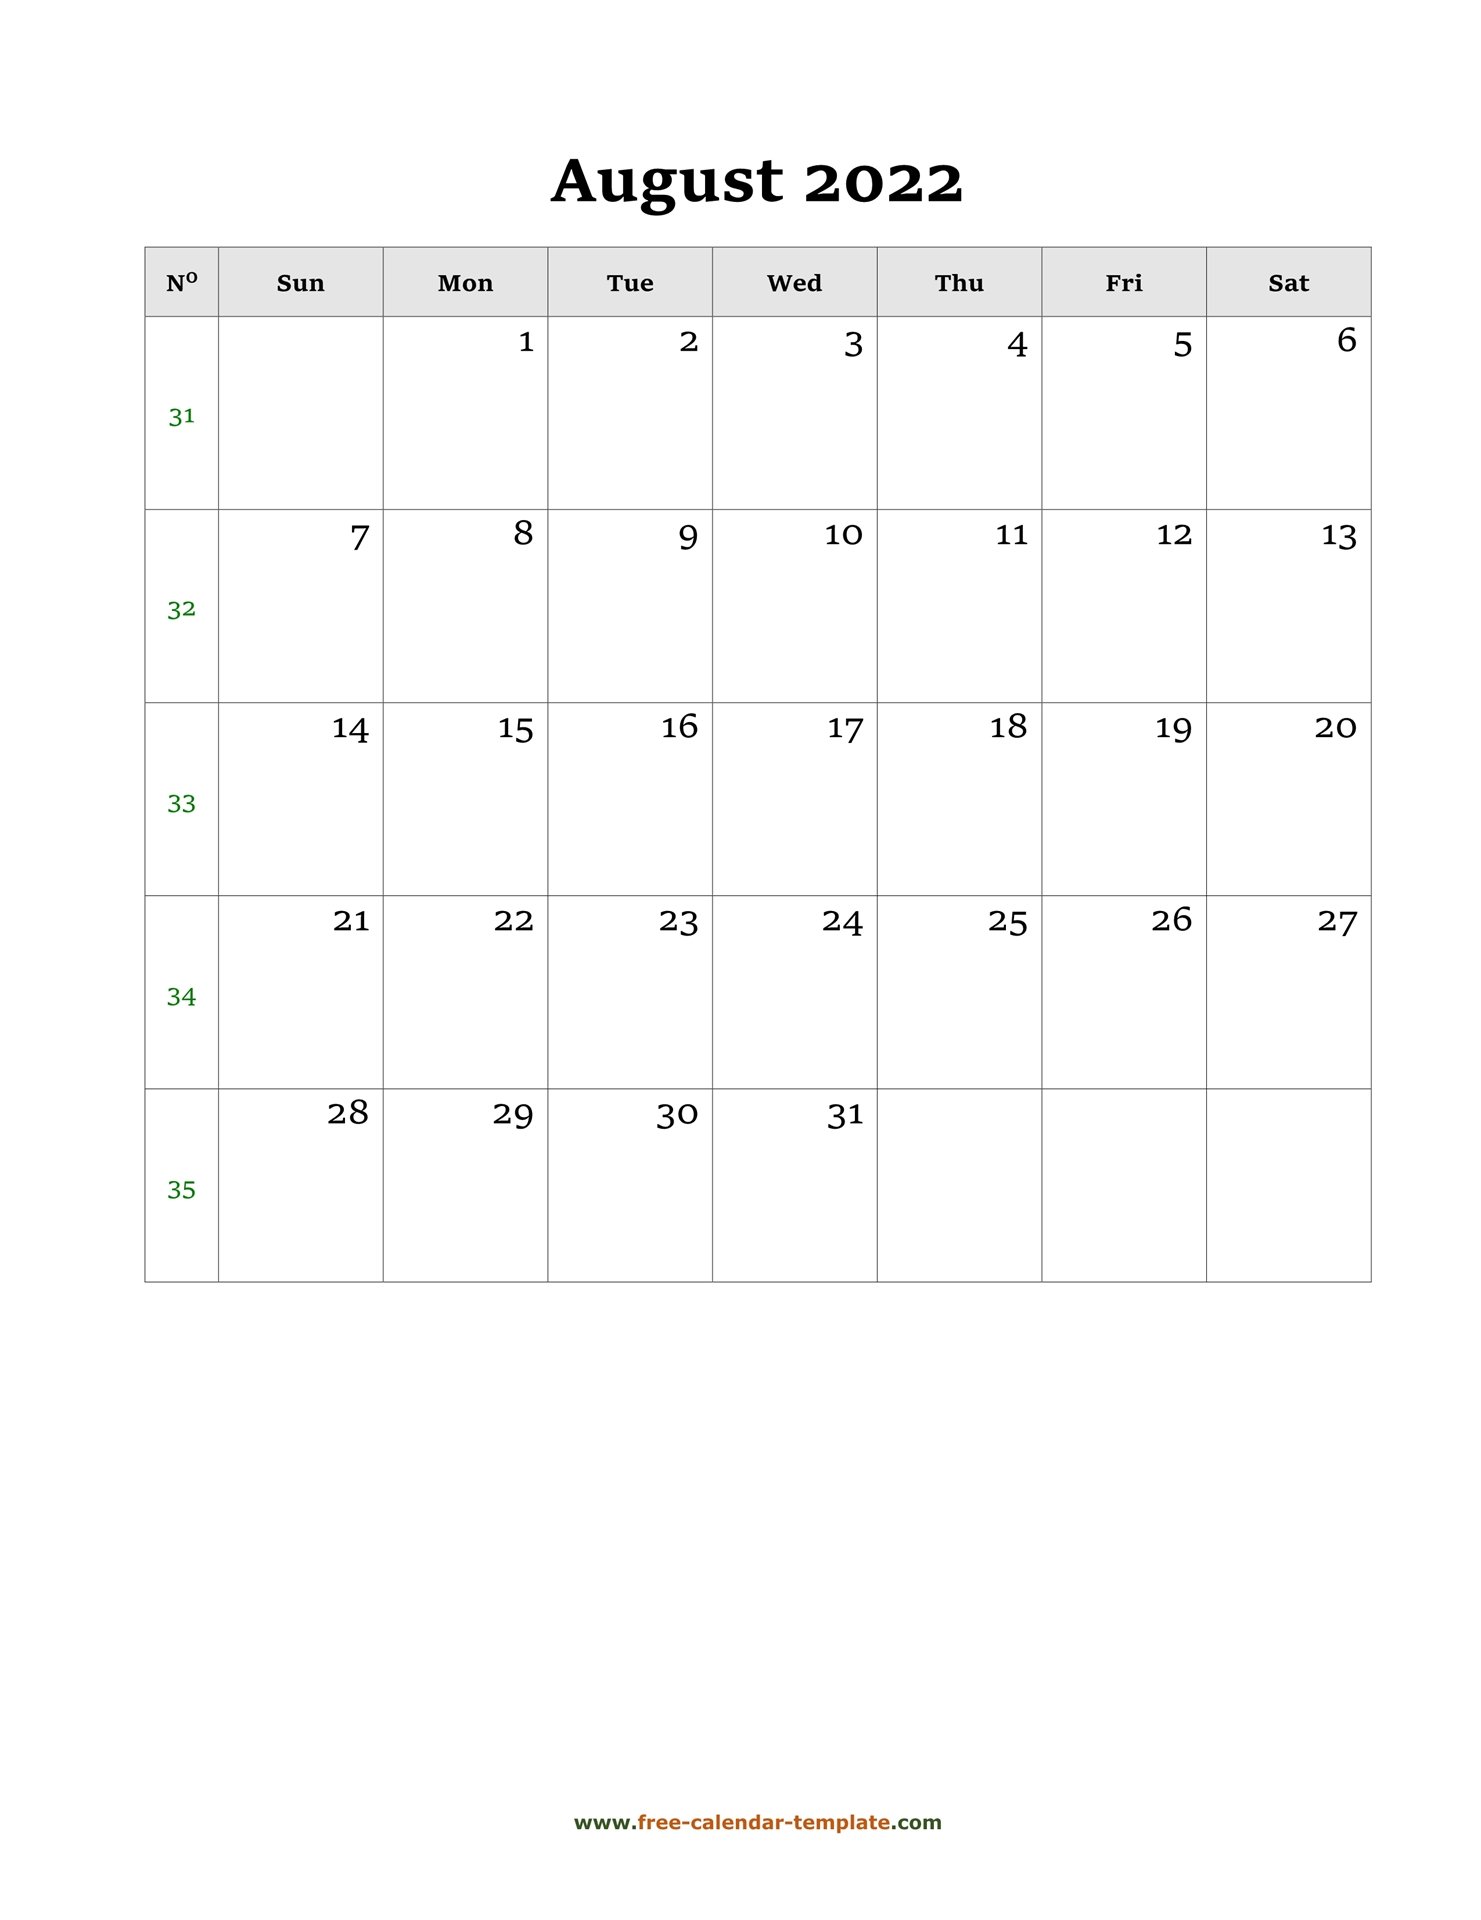 Collect Printable Calendar For August 2022